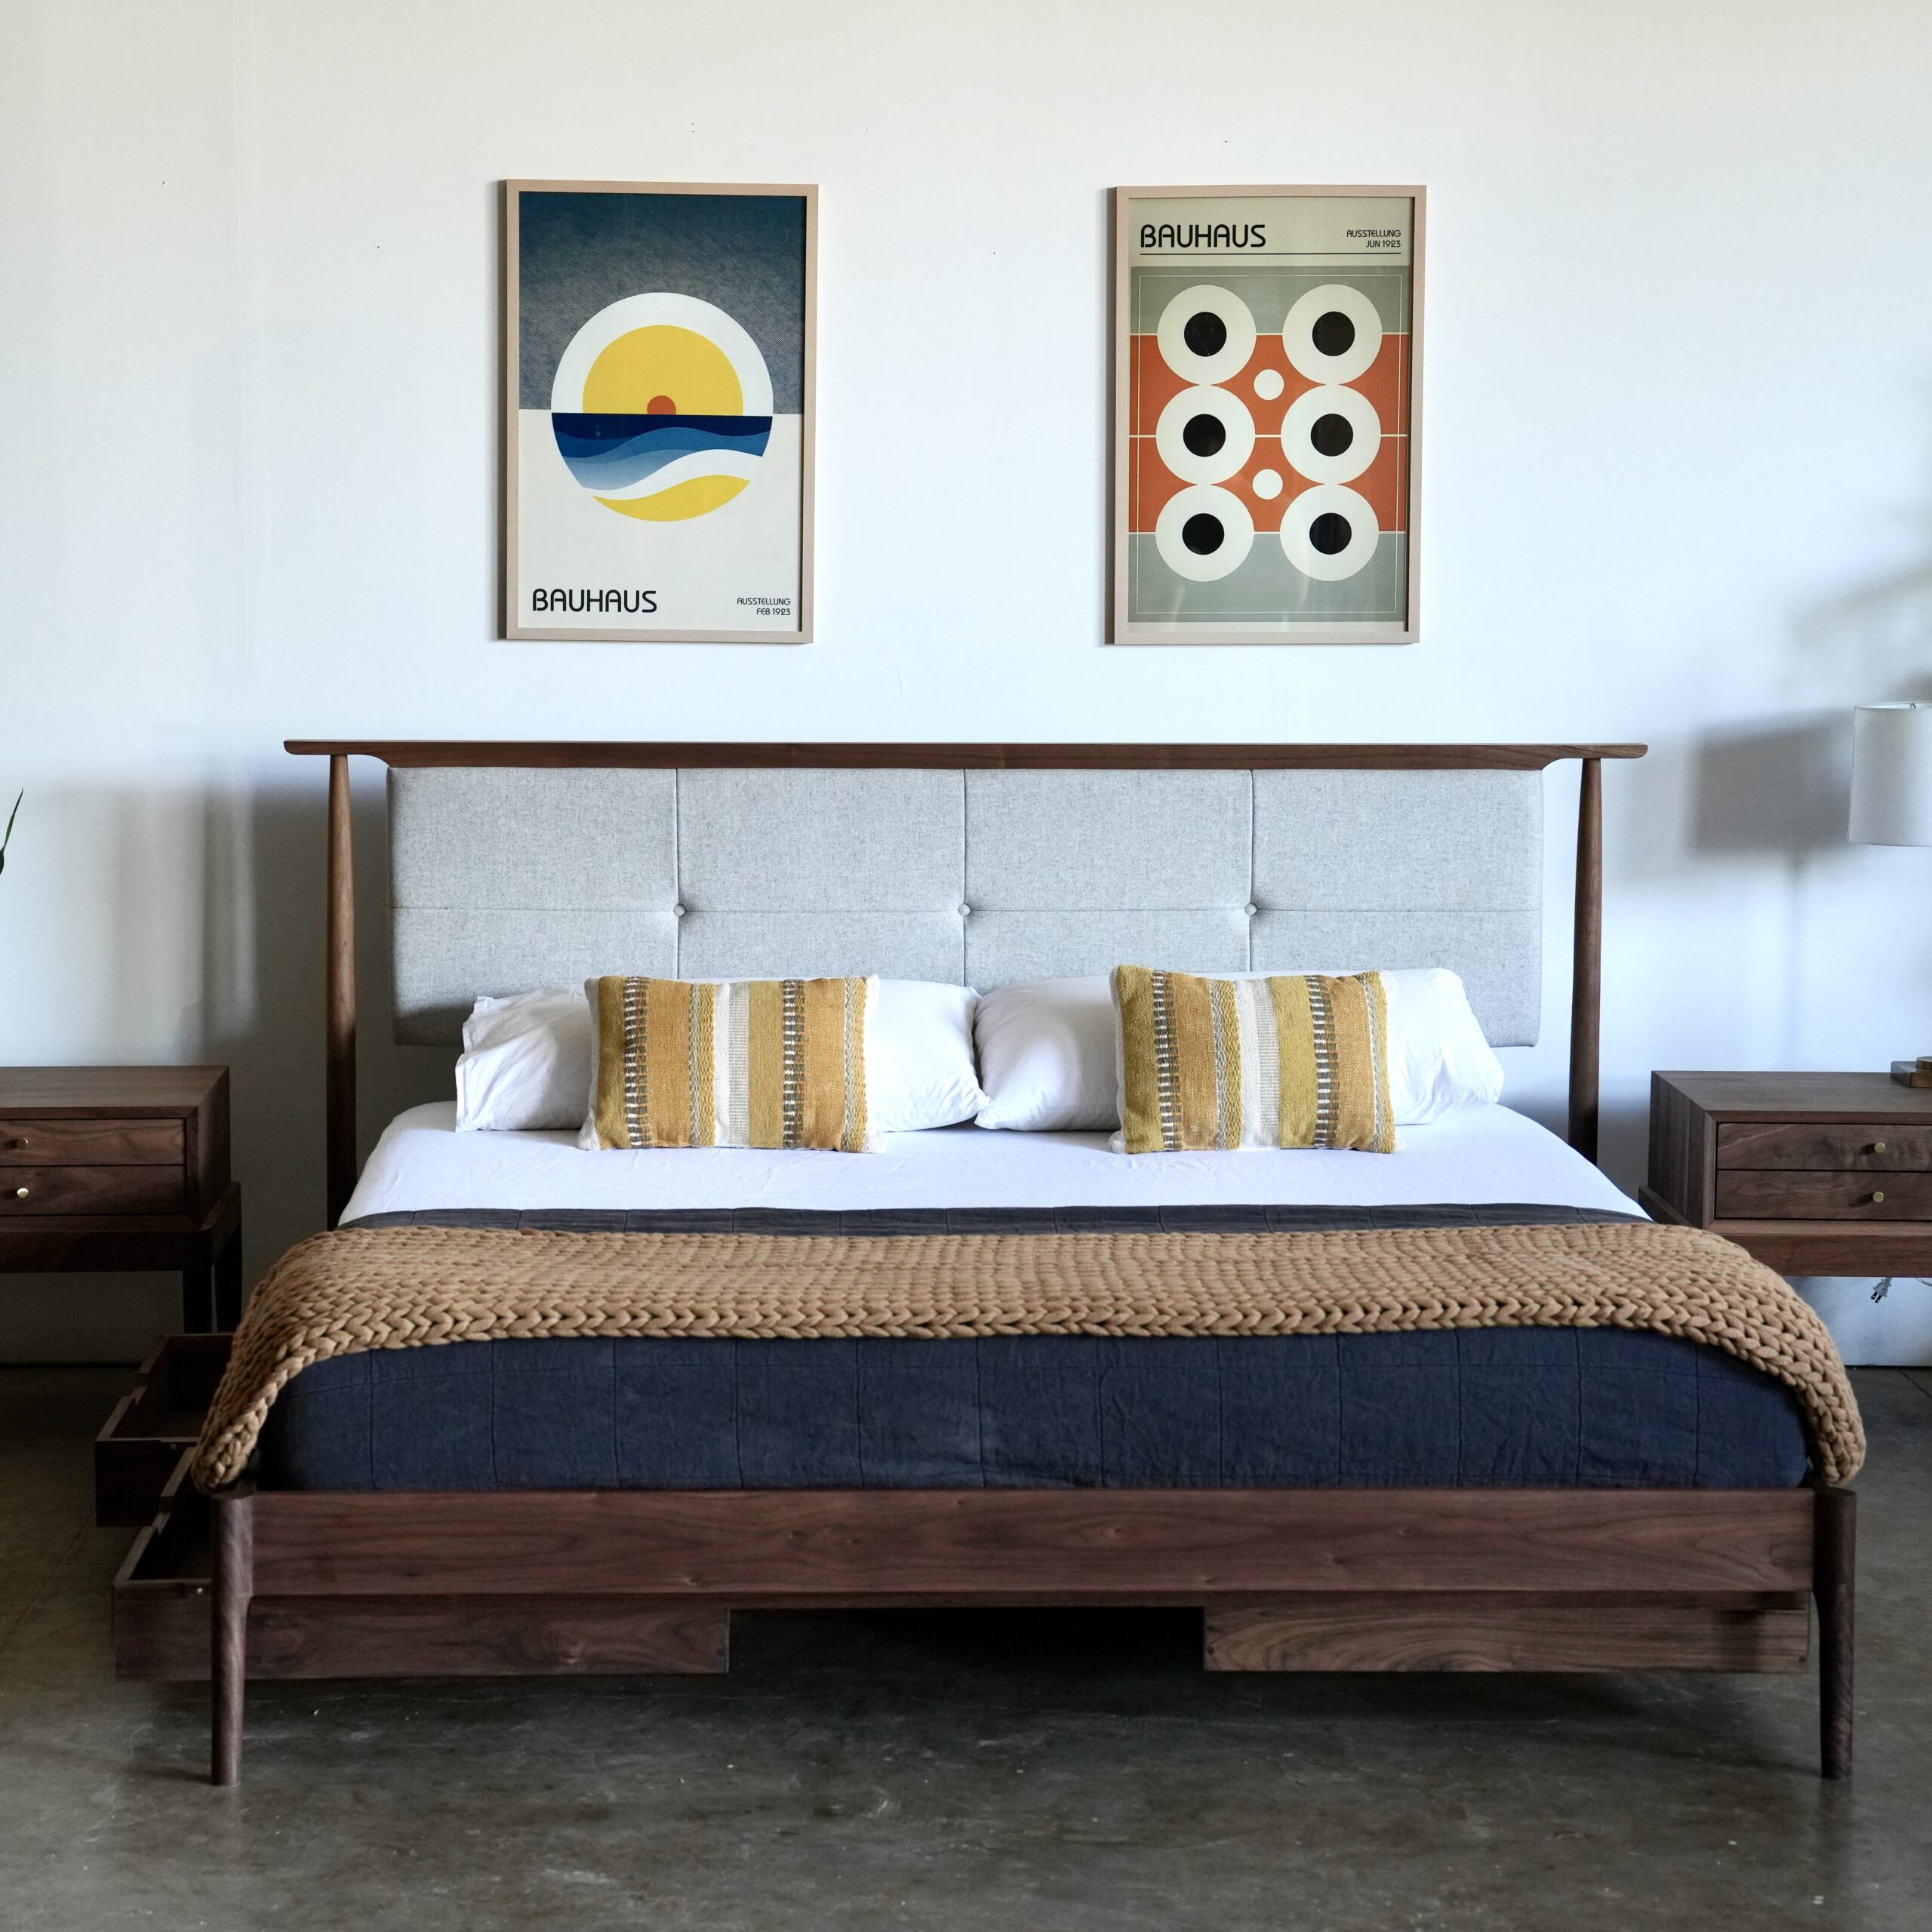 A walnut midcentury modern bed with an upholstered headboard that appears to float and drawers suspended from beneath. The headboard is an oatmeal color.